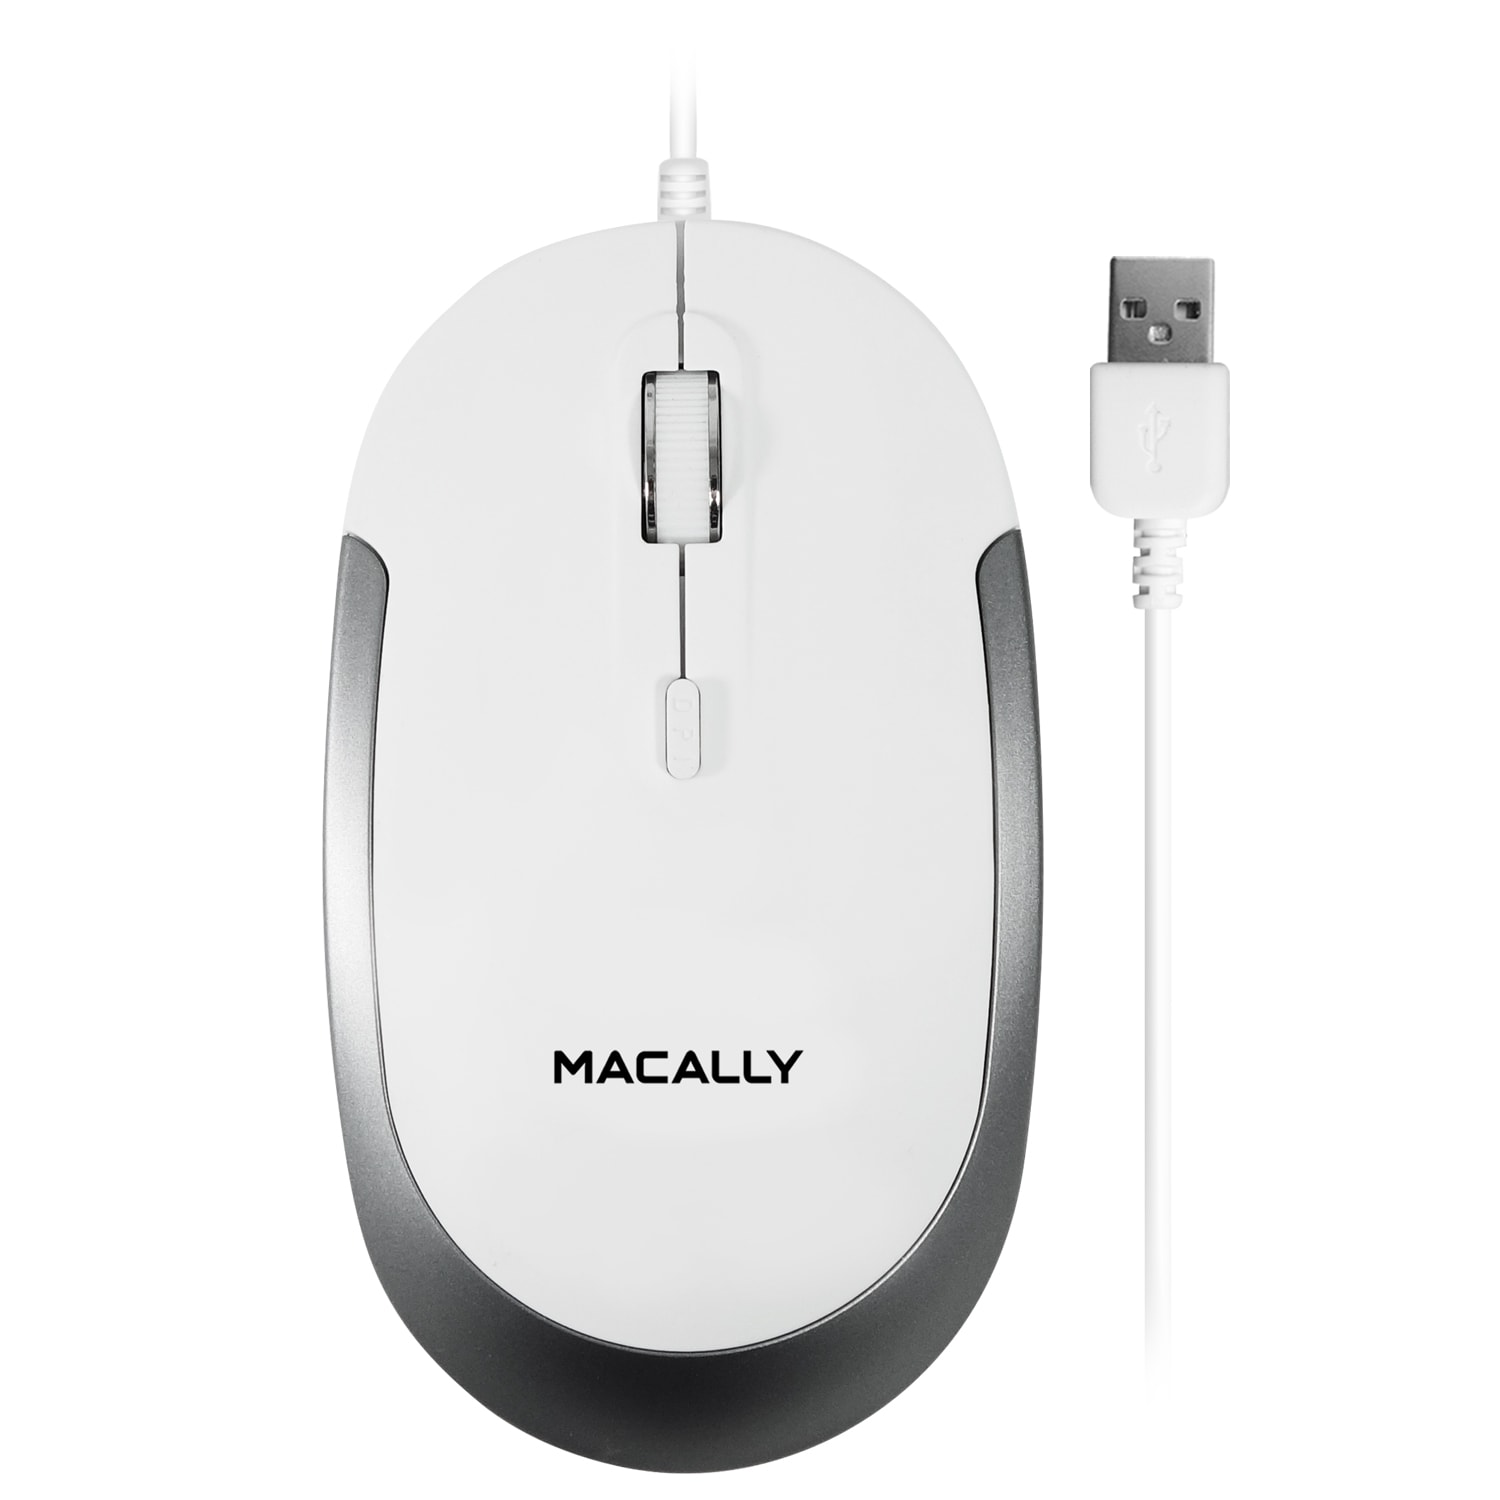 Macally Macally Silent USB Wired for Apple Mac or Windows PC Laptop/Desktop Computer | Slim & Compact Mice Design with Sensor and DPI Switch 800/1200/1600/2400 | Small for Easy Travel (